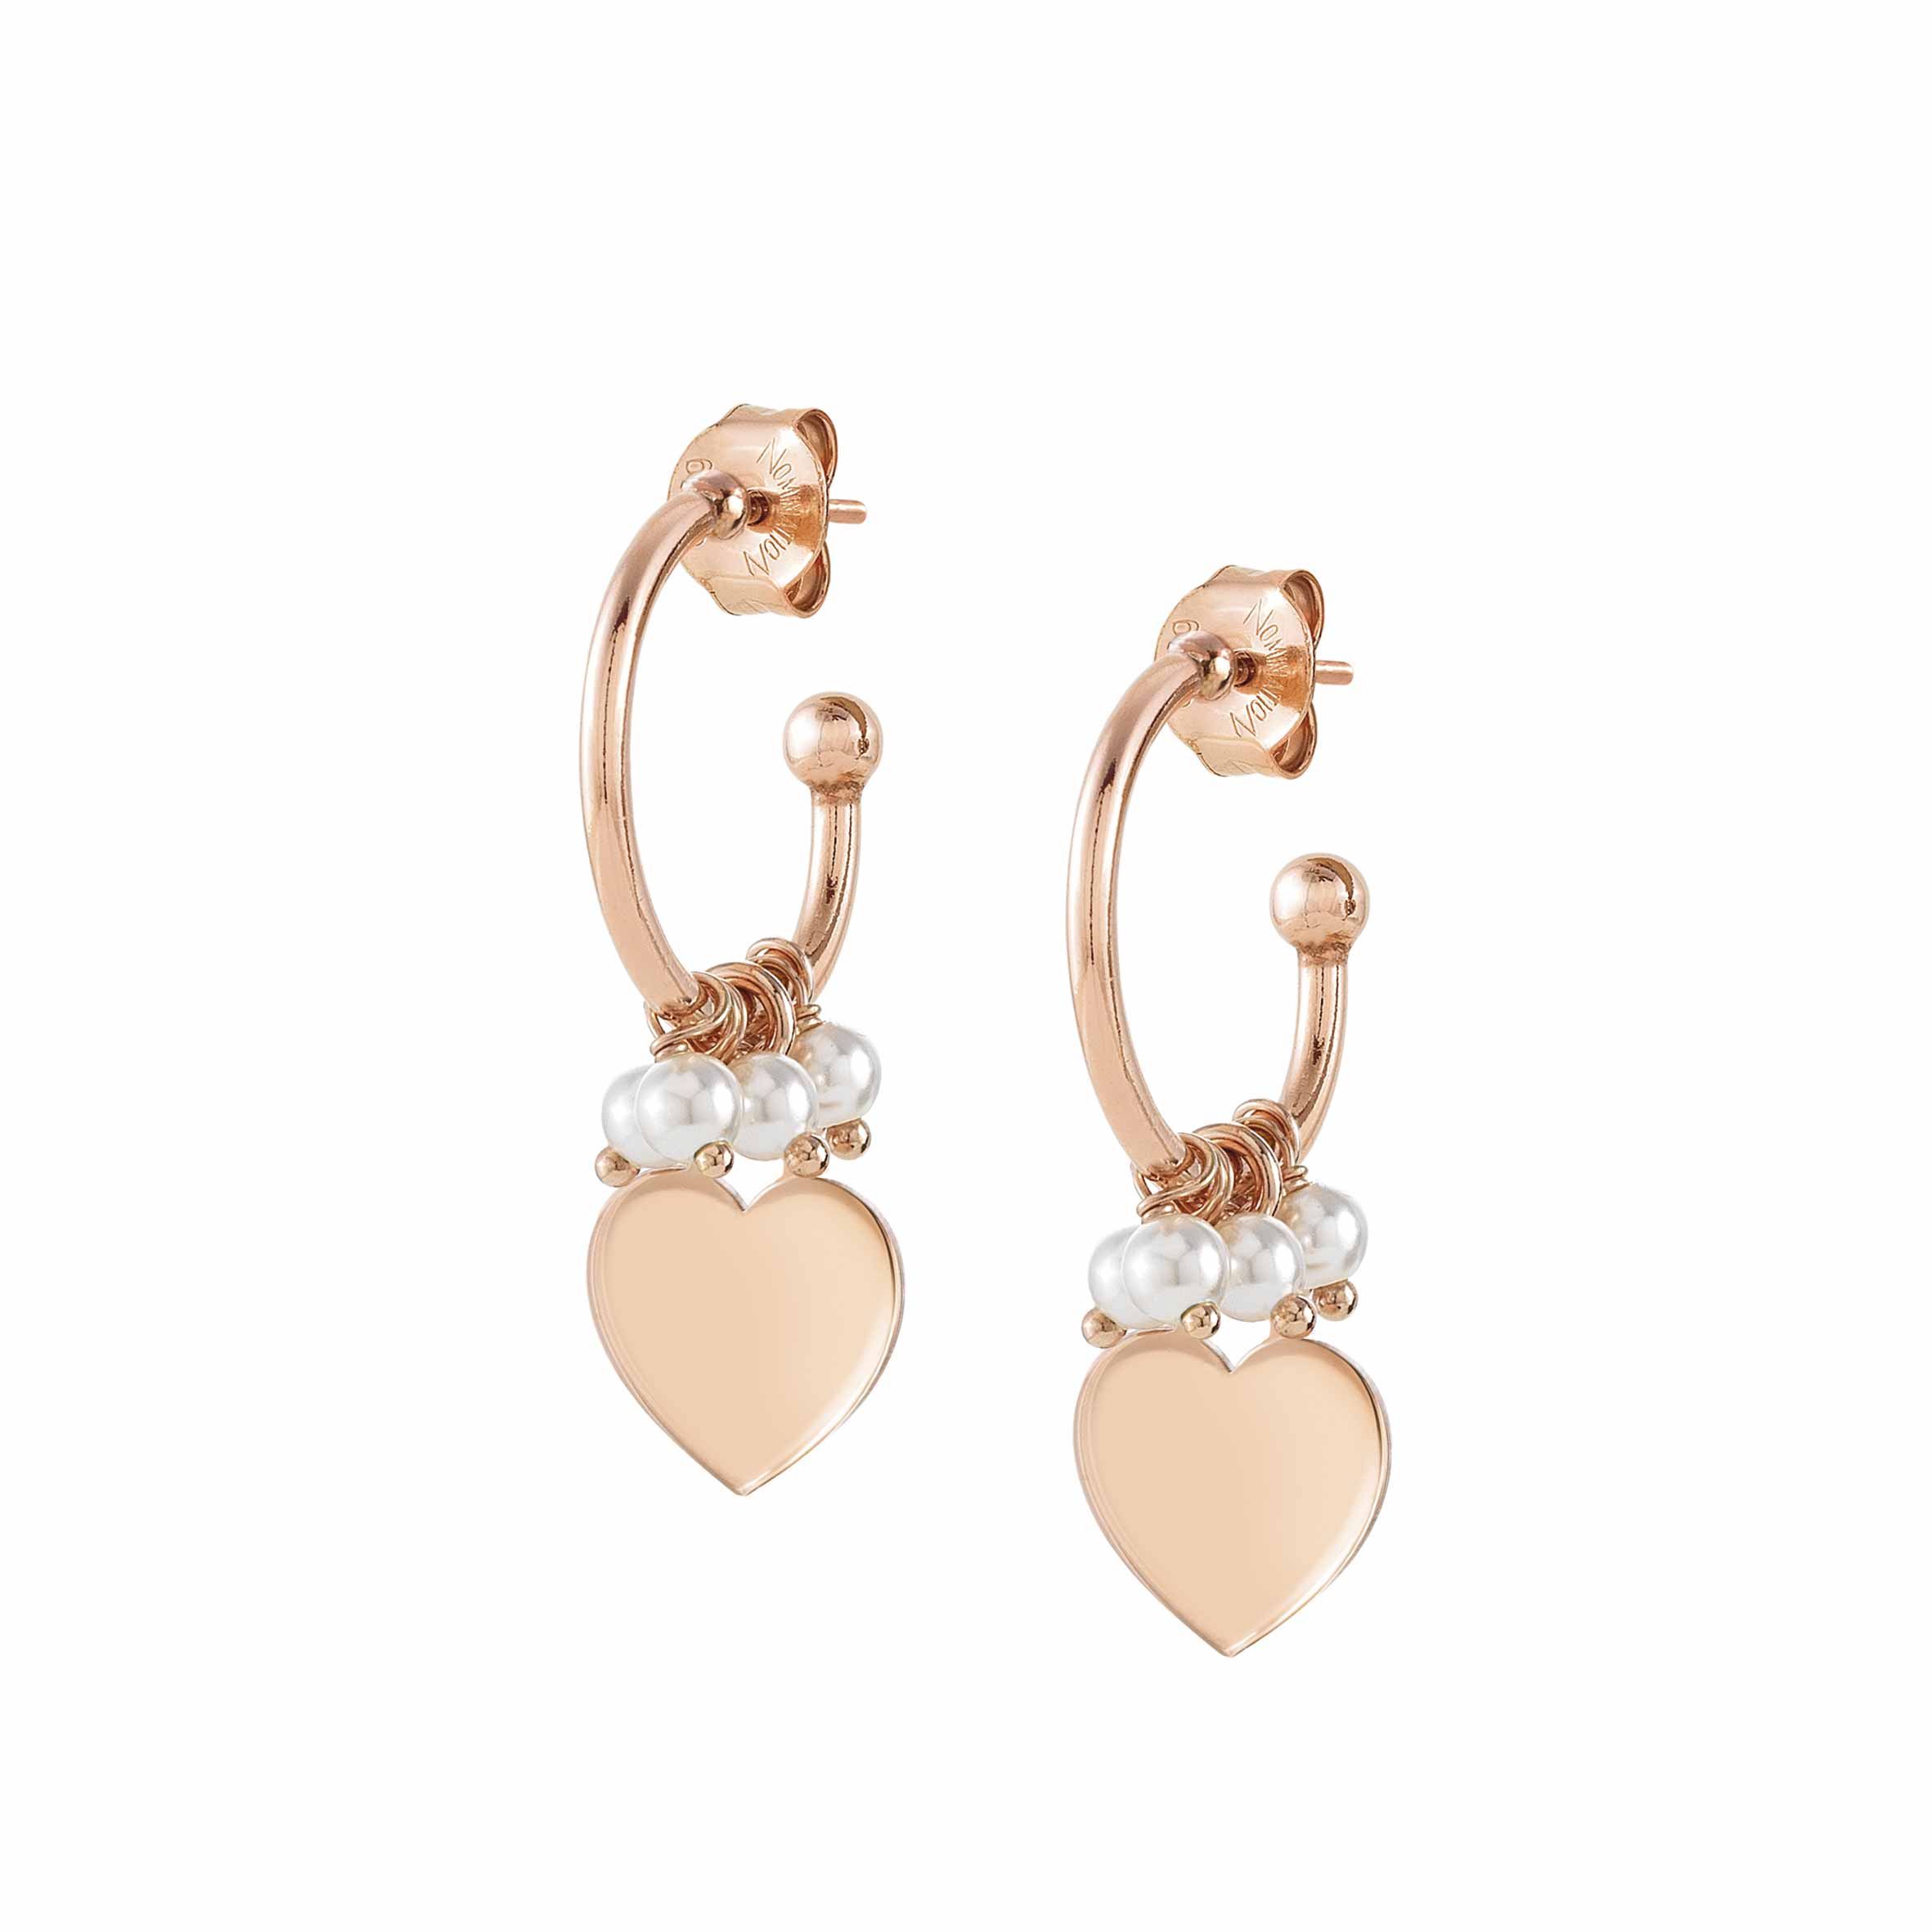 Nomination Melodie White Crystal Pearl Earrings 147713/002 With Rose Gold Heart